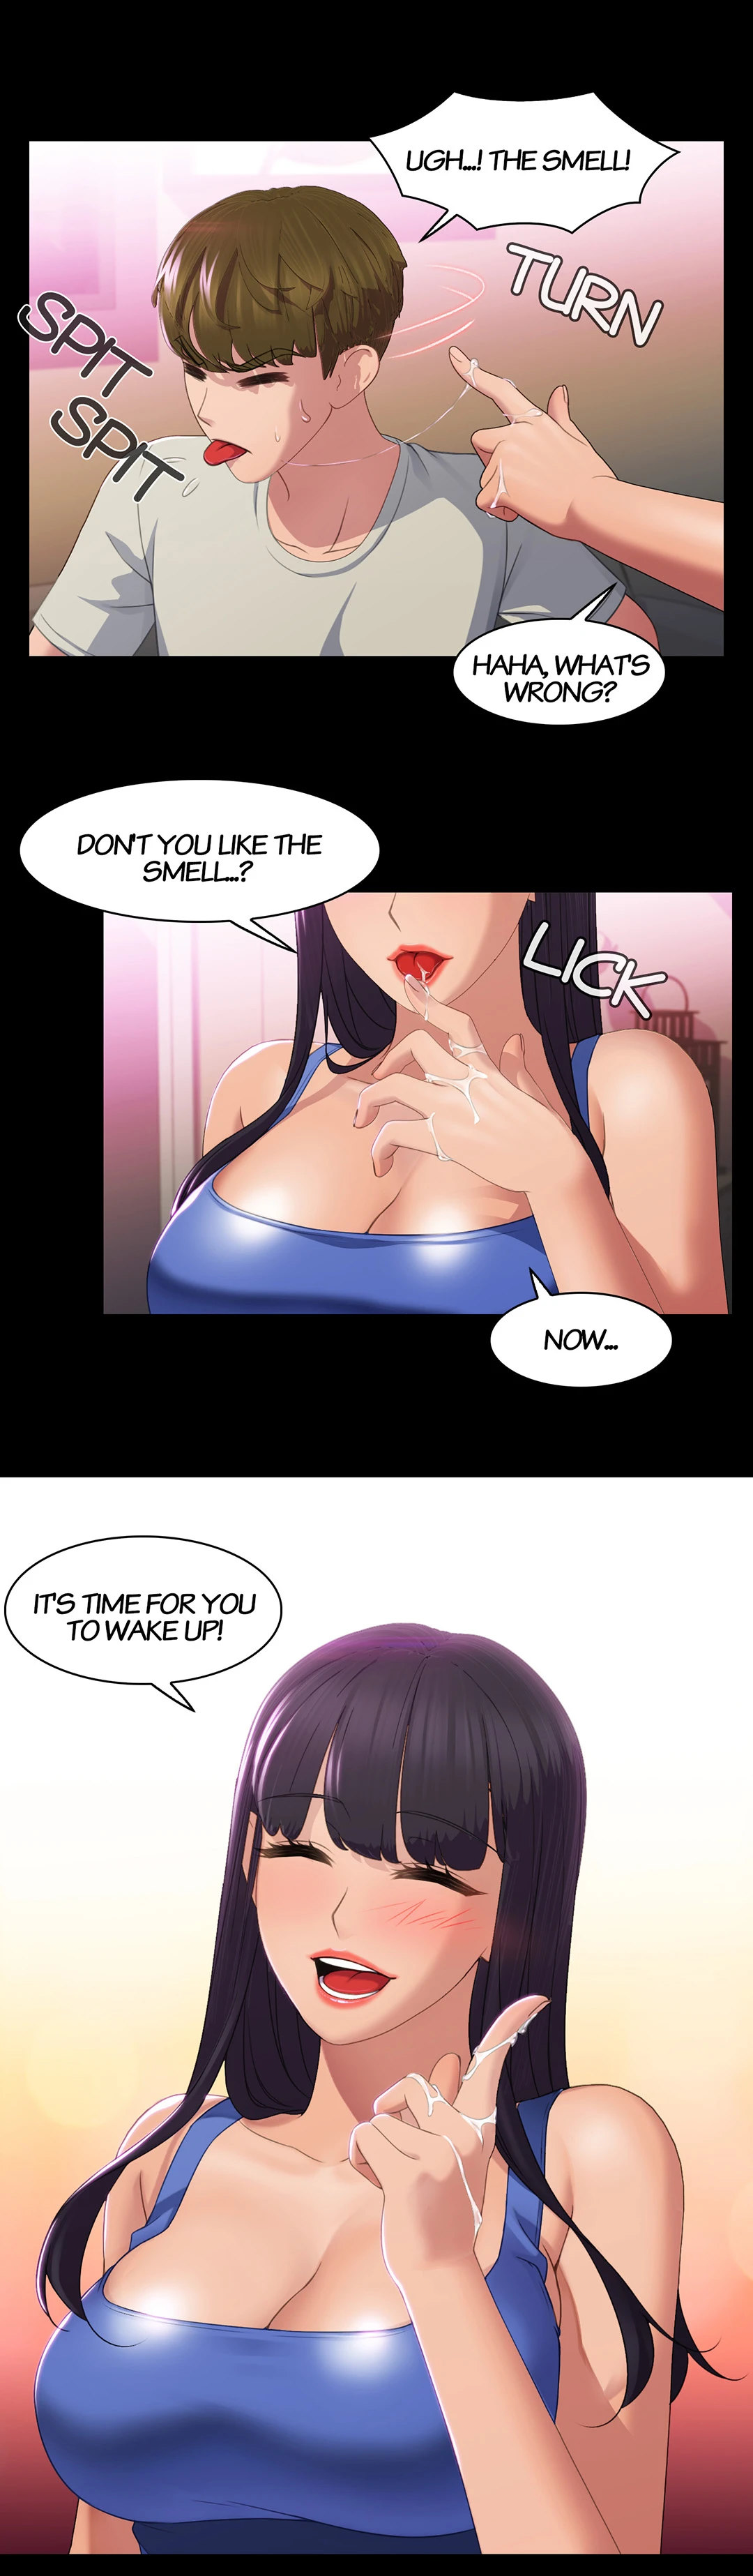 My Friend’s Sister - Chapter 12 Page 8